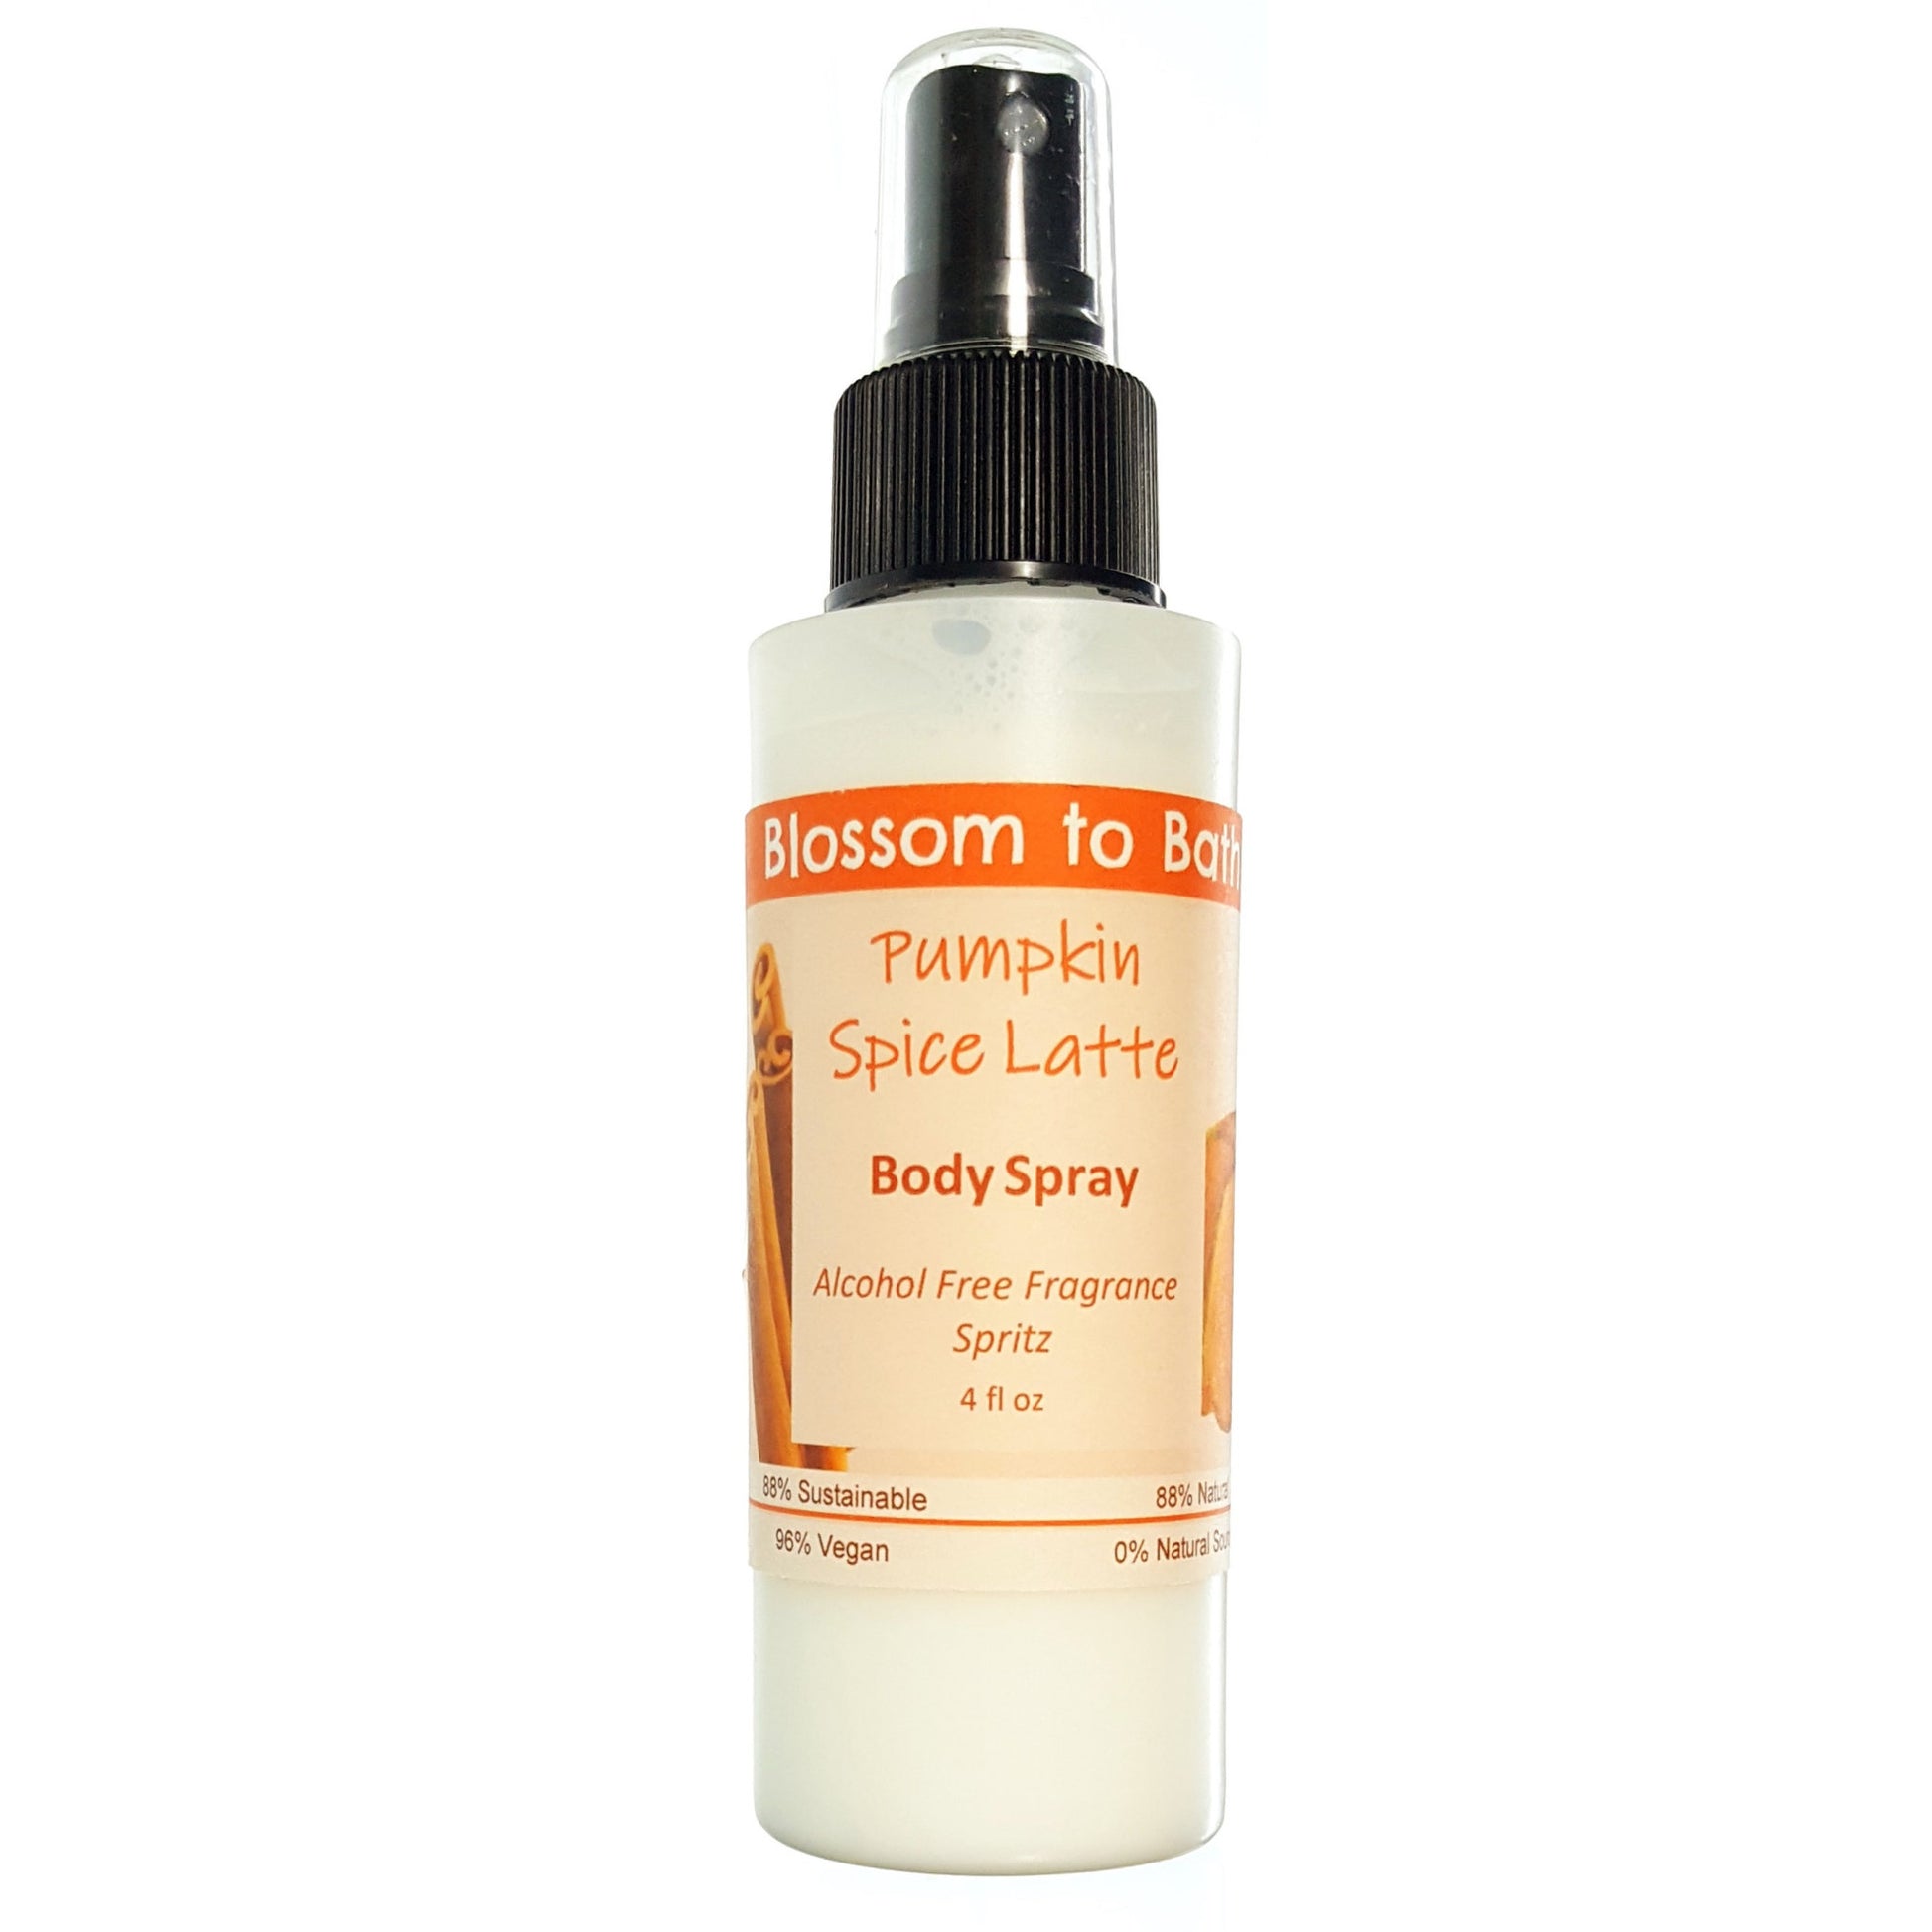 Buy Blossom to Bath Pumpkin Spice Latte Body Spray from Flowersong Soap Studio.  Natural  freshening of skin, linens, or air  Deep vanilla and lightly fruited spice blend seamlessly with rich coffee.